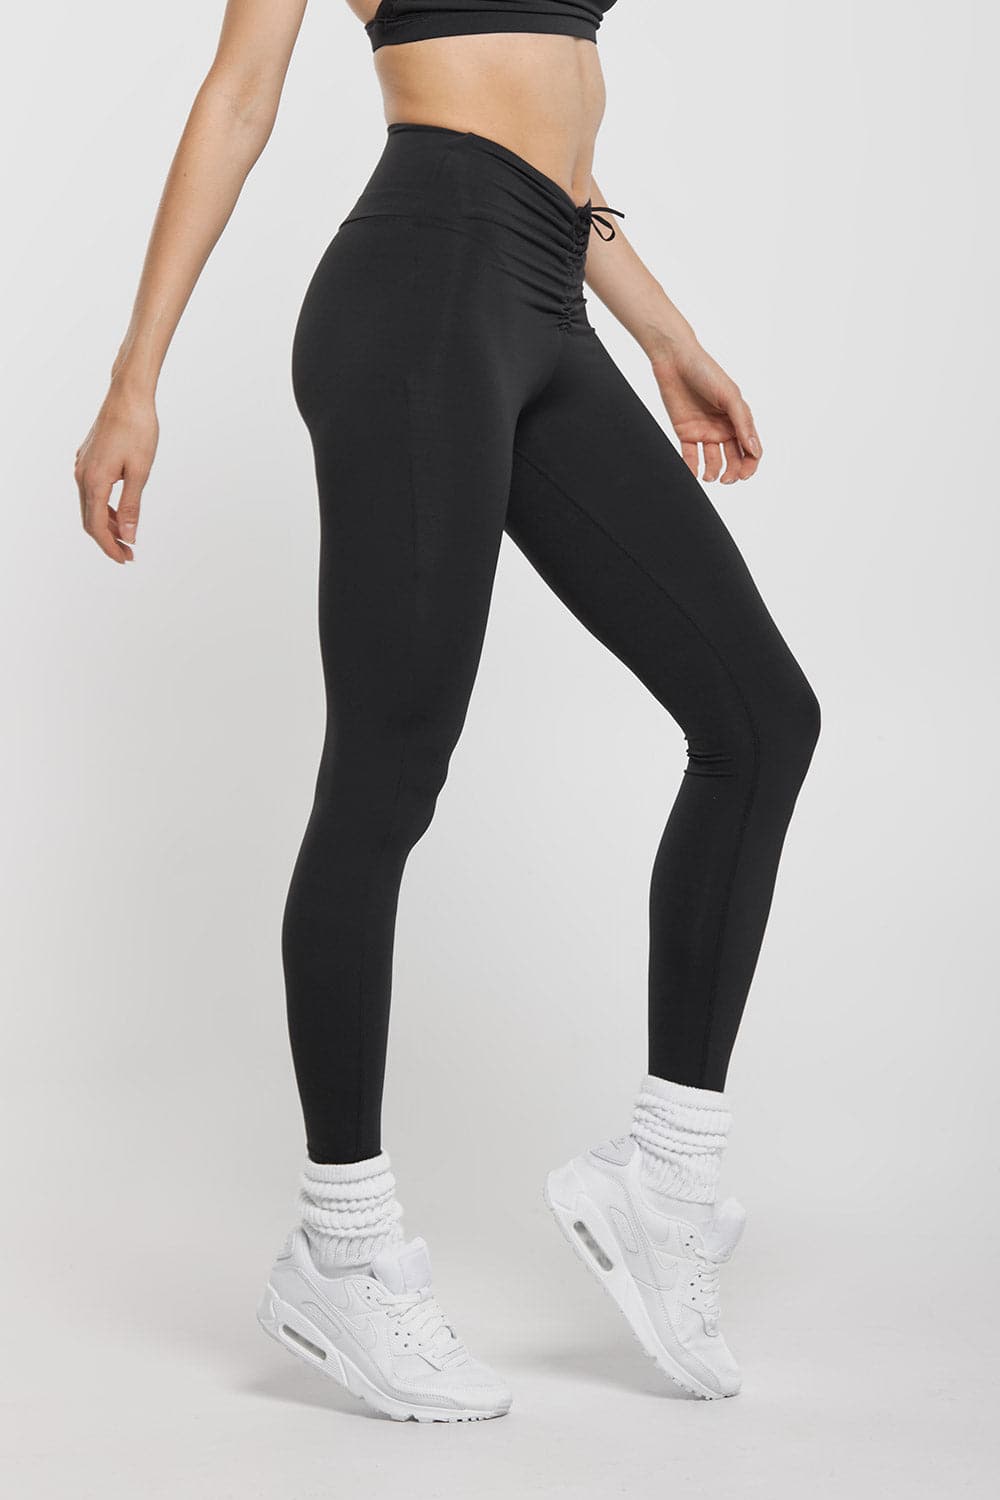 Forever 21 Launches New Plus Size Activewear - Stylish Curves